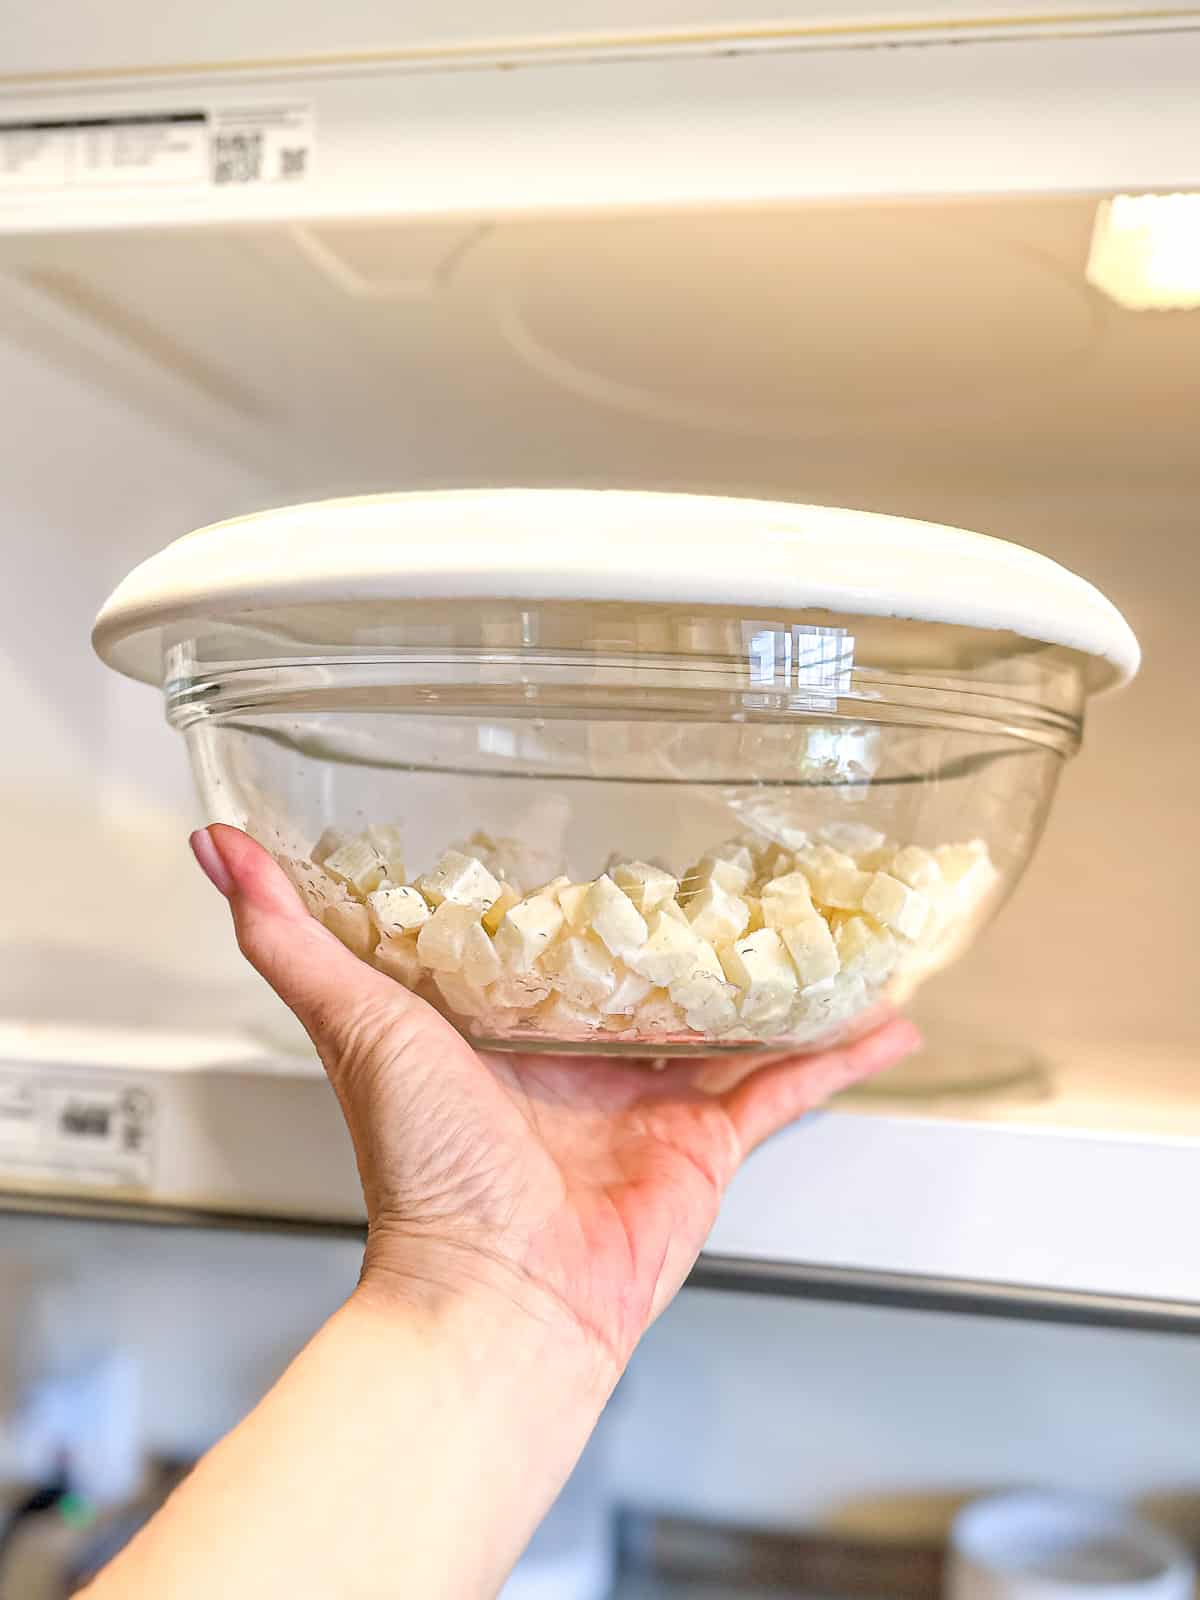 Potatoes in a glass bowl with a plate, turned over top being put into a microwave.